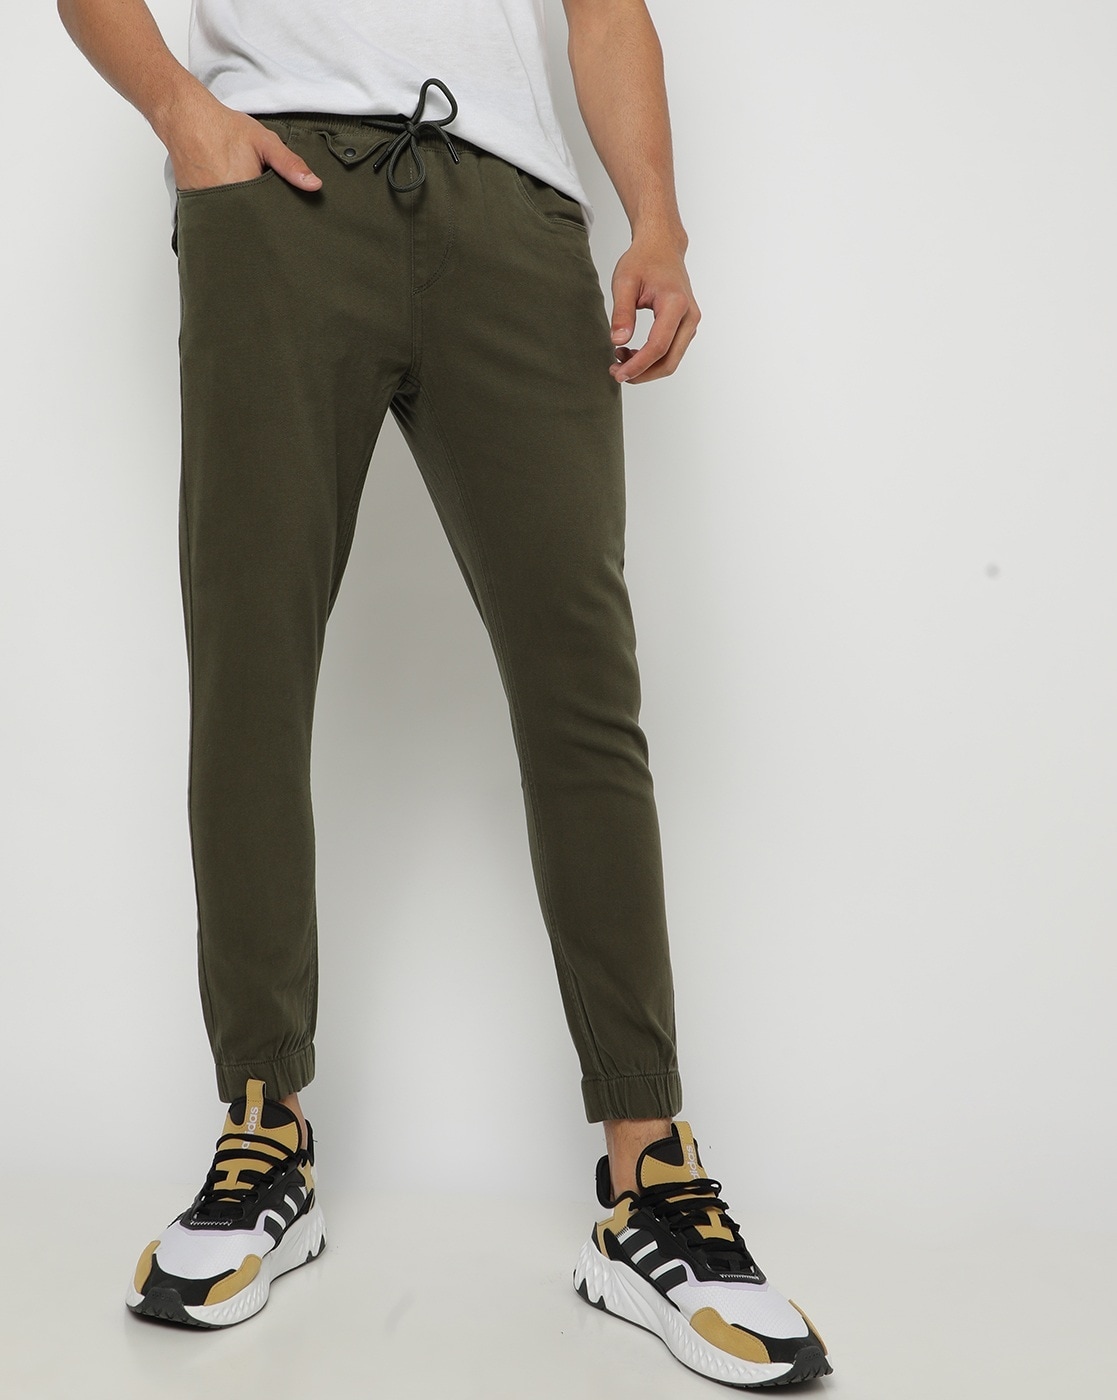 Buy John Players Brown Slim Fit Trousers from top Brands at Best Prices  Online in India  Tata CLiQ